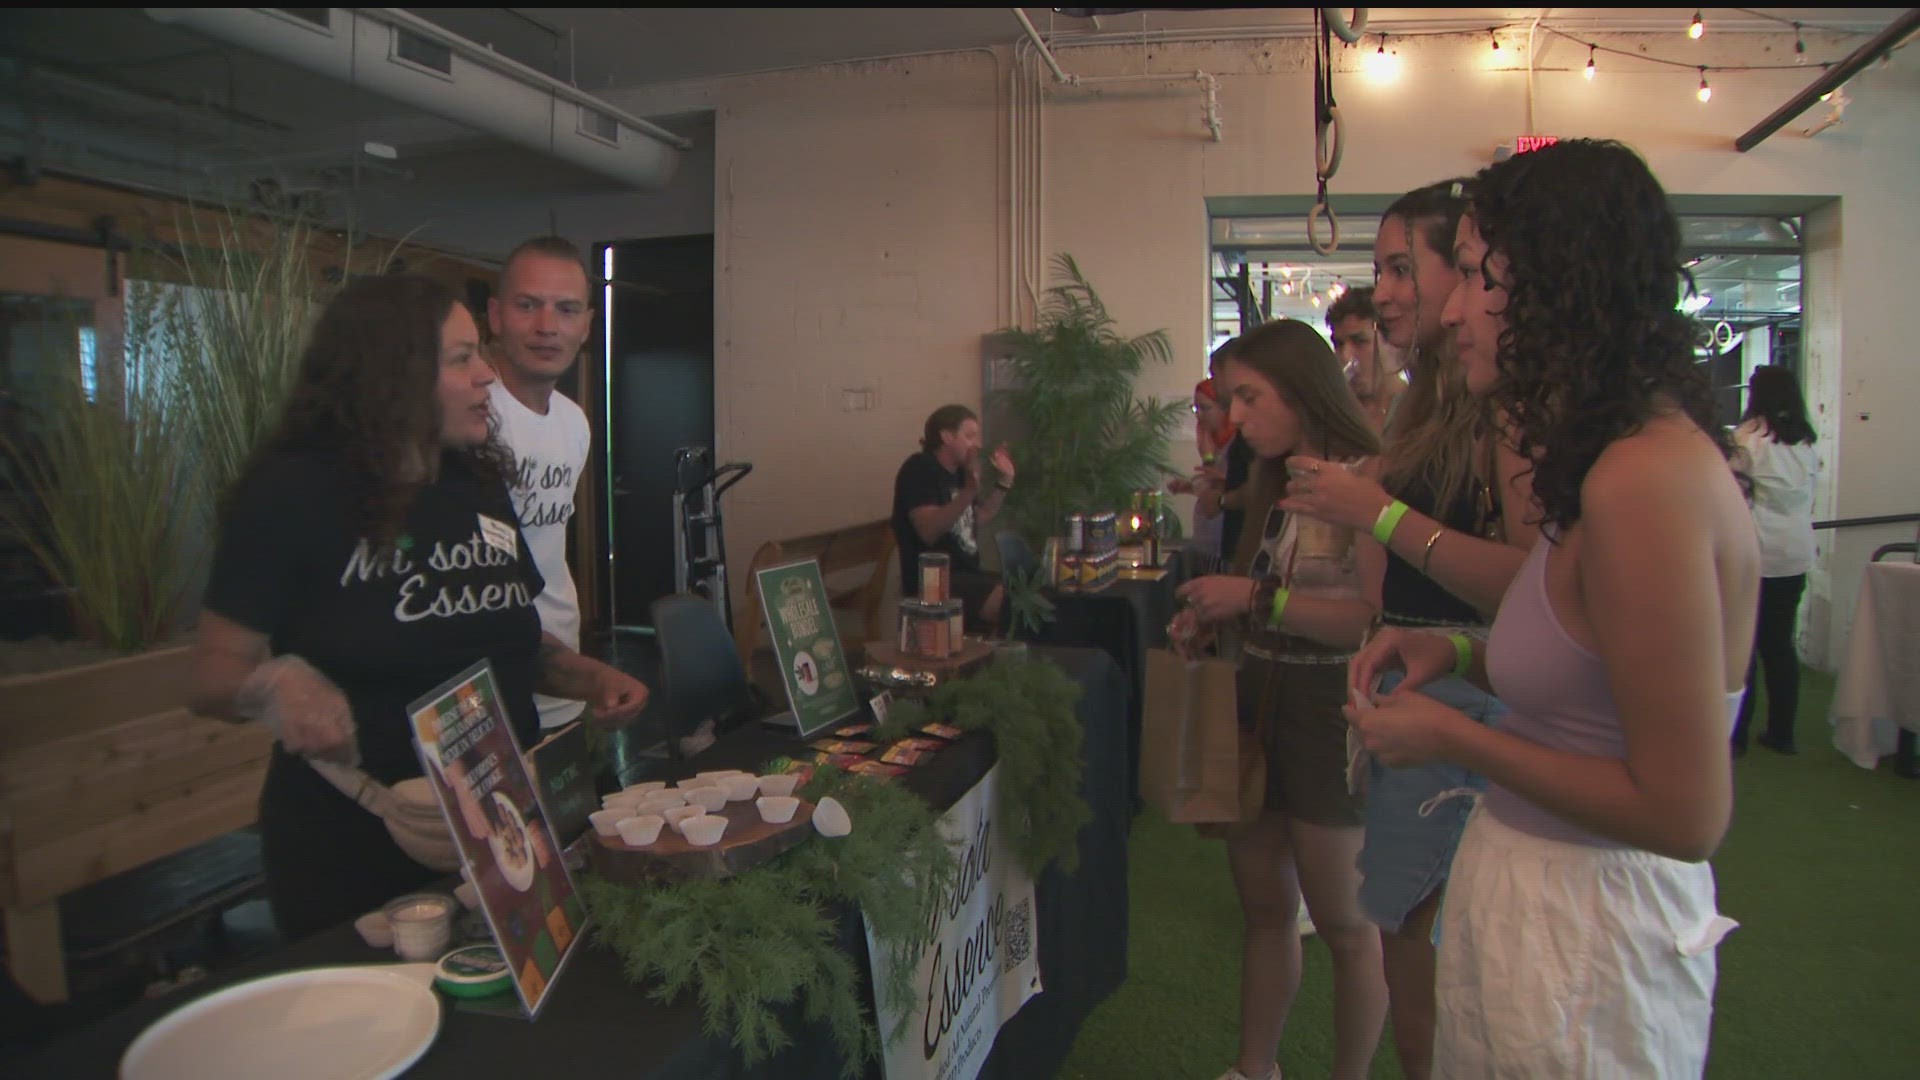 Canna Connect held in Uptown is just one of the events leading up to the legalization date of August 1.